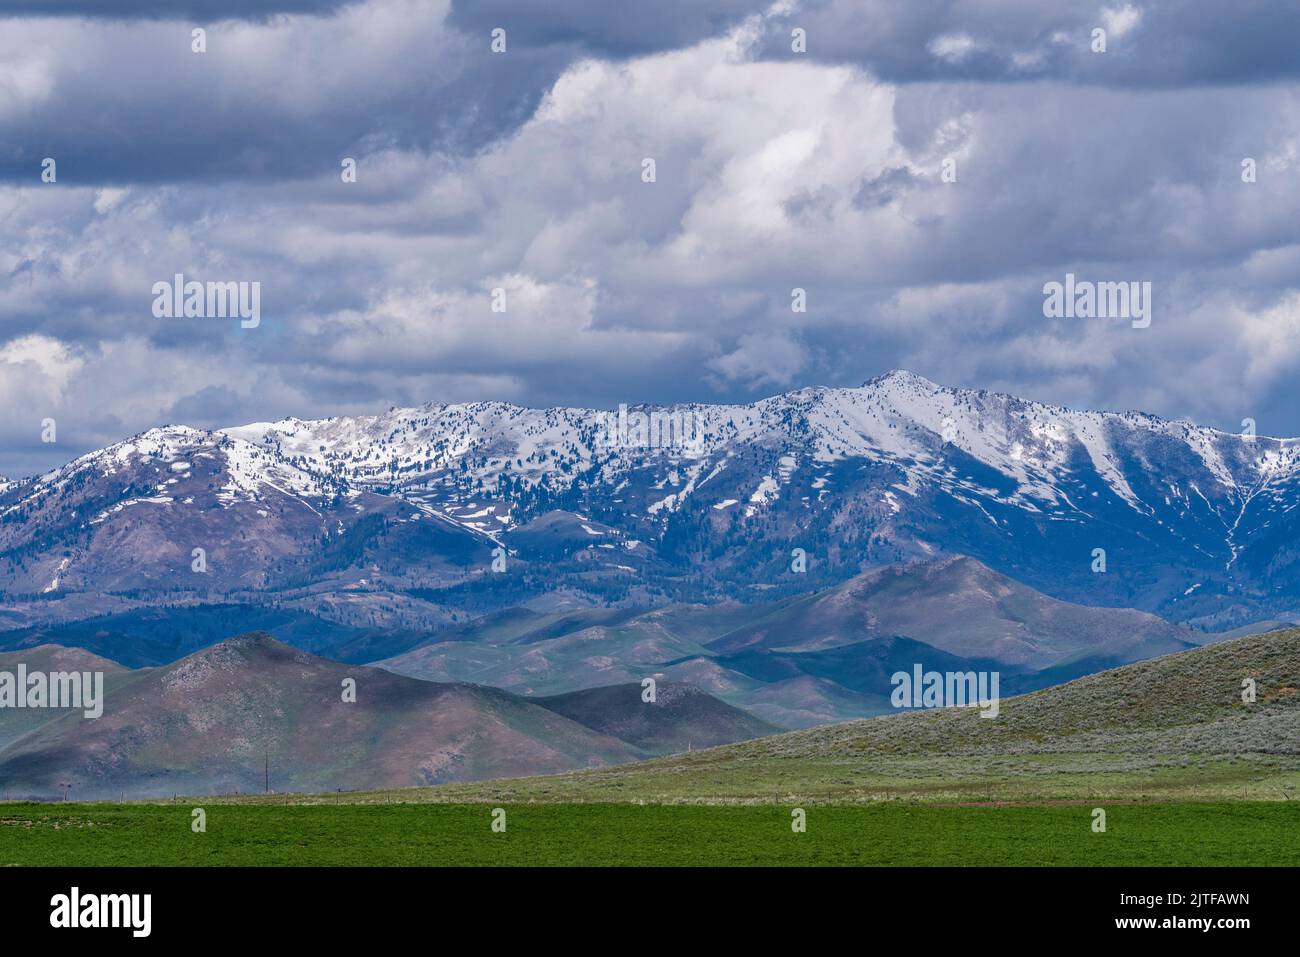 United States, Idaho, Fairfield, Clouds over snowy Soldier Mountain Stock Photo